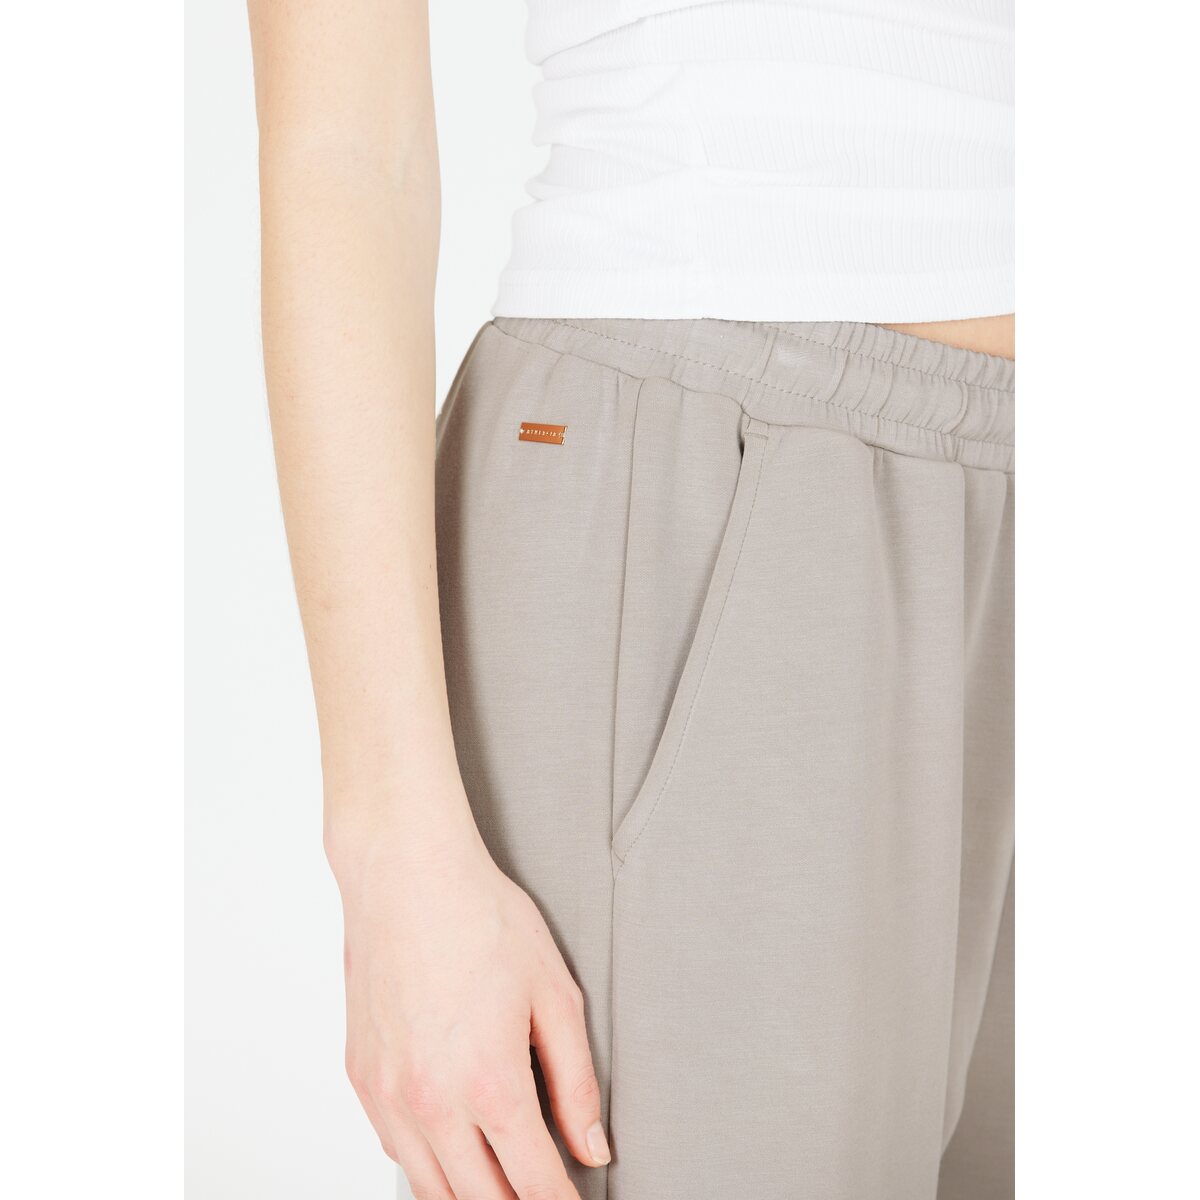 Athlecia Jacey V2 Womenswear Sweat Pants 4 Shaws Department Stores